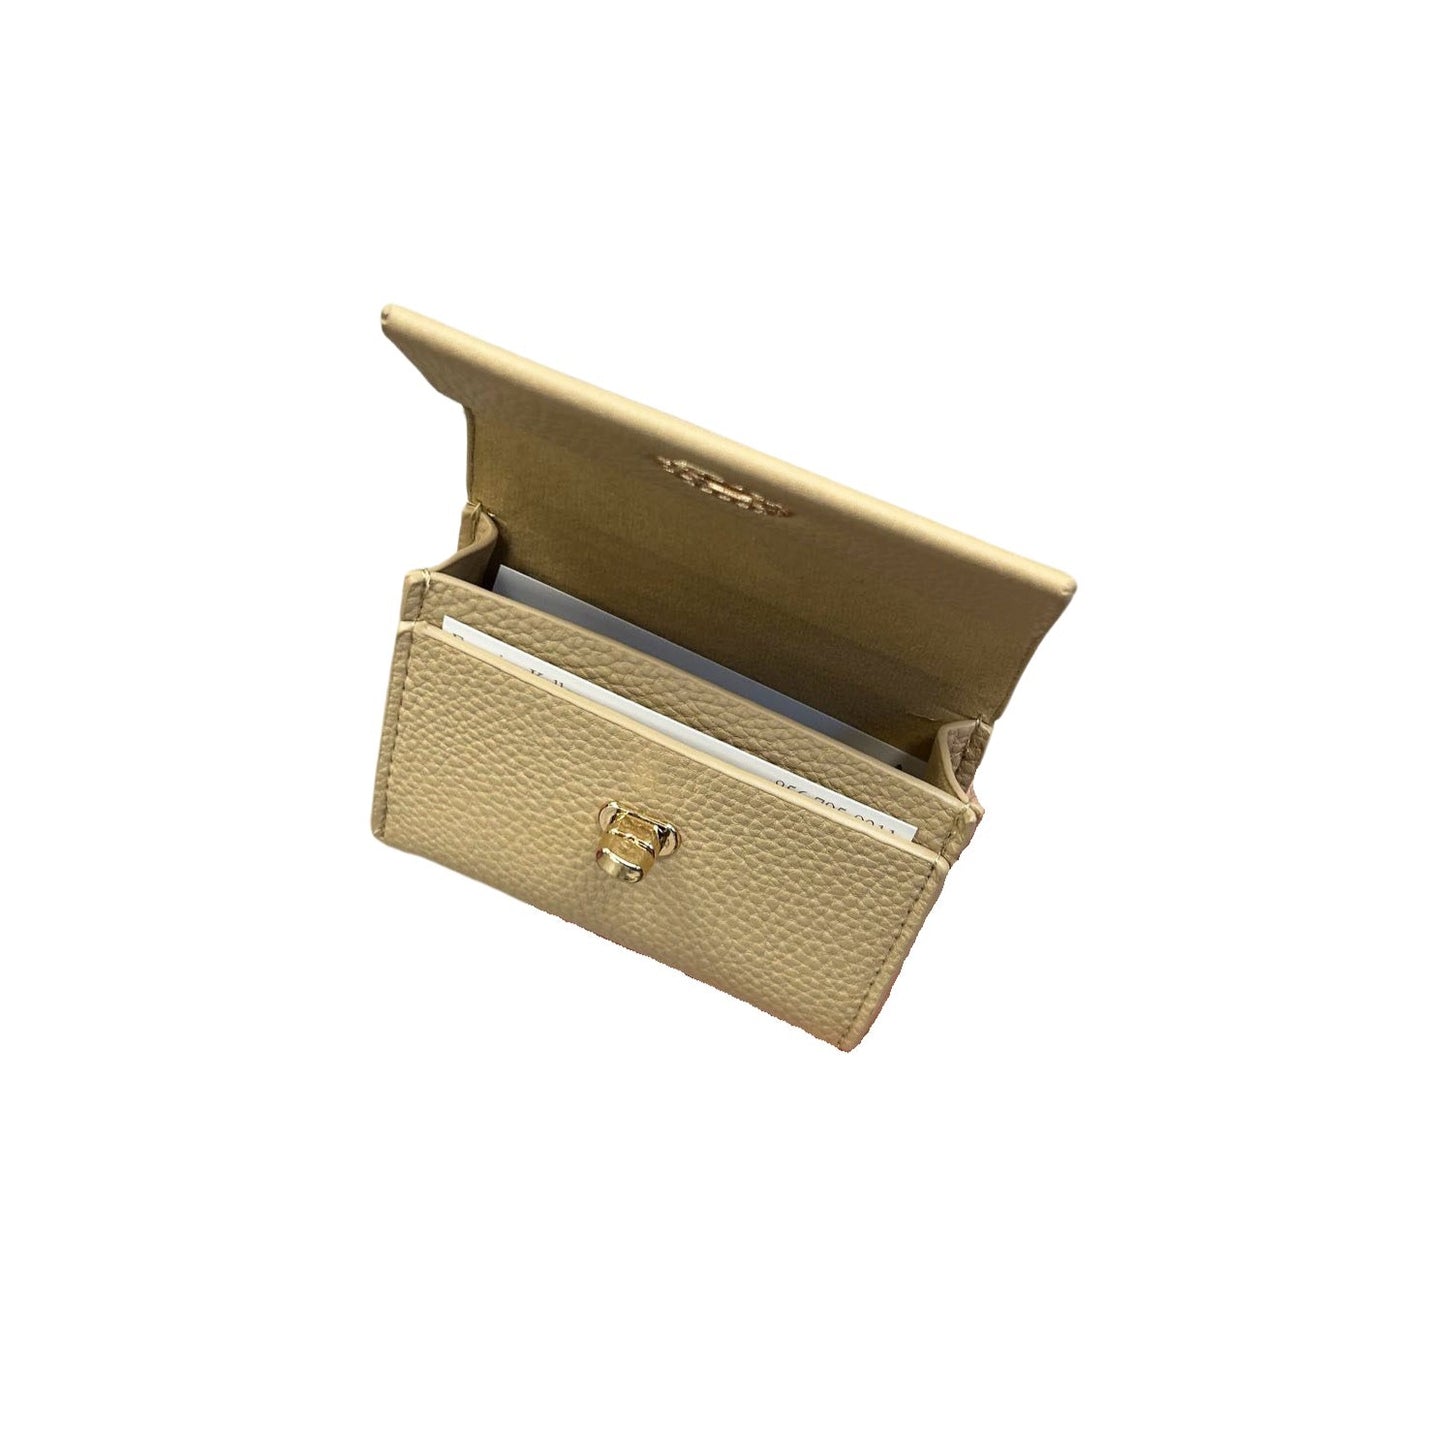 Turn Lock Faux Leather Wallet With Gold Clasp- In 3 Colors